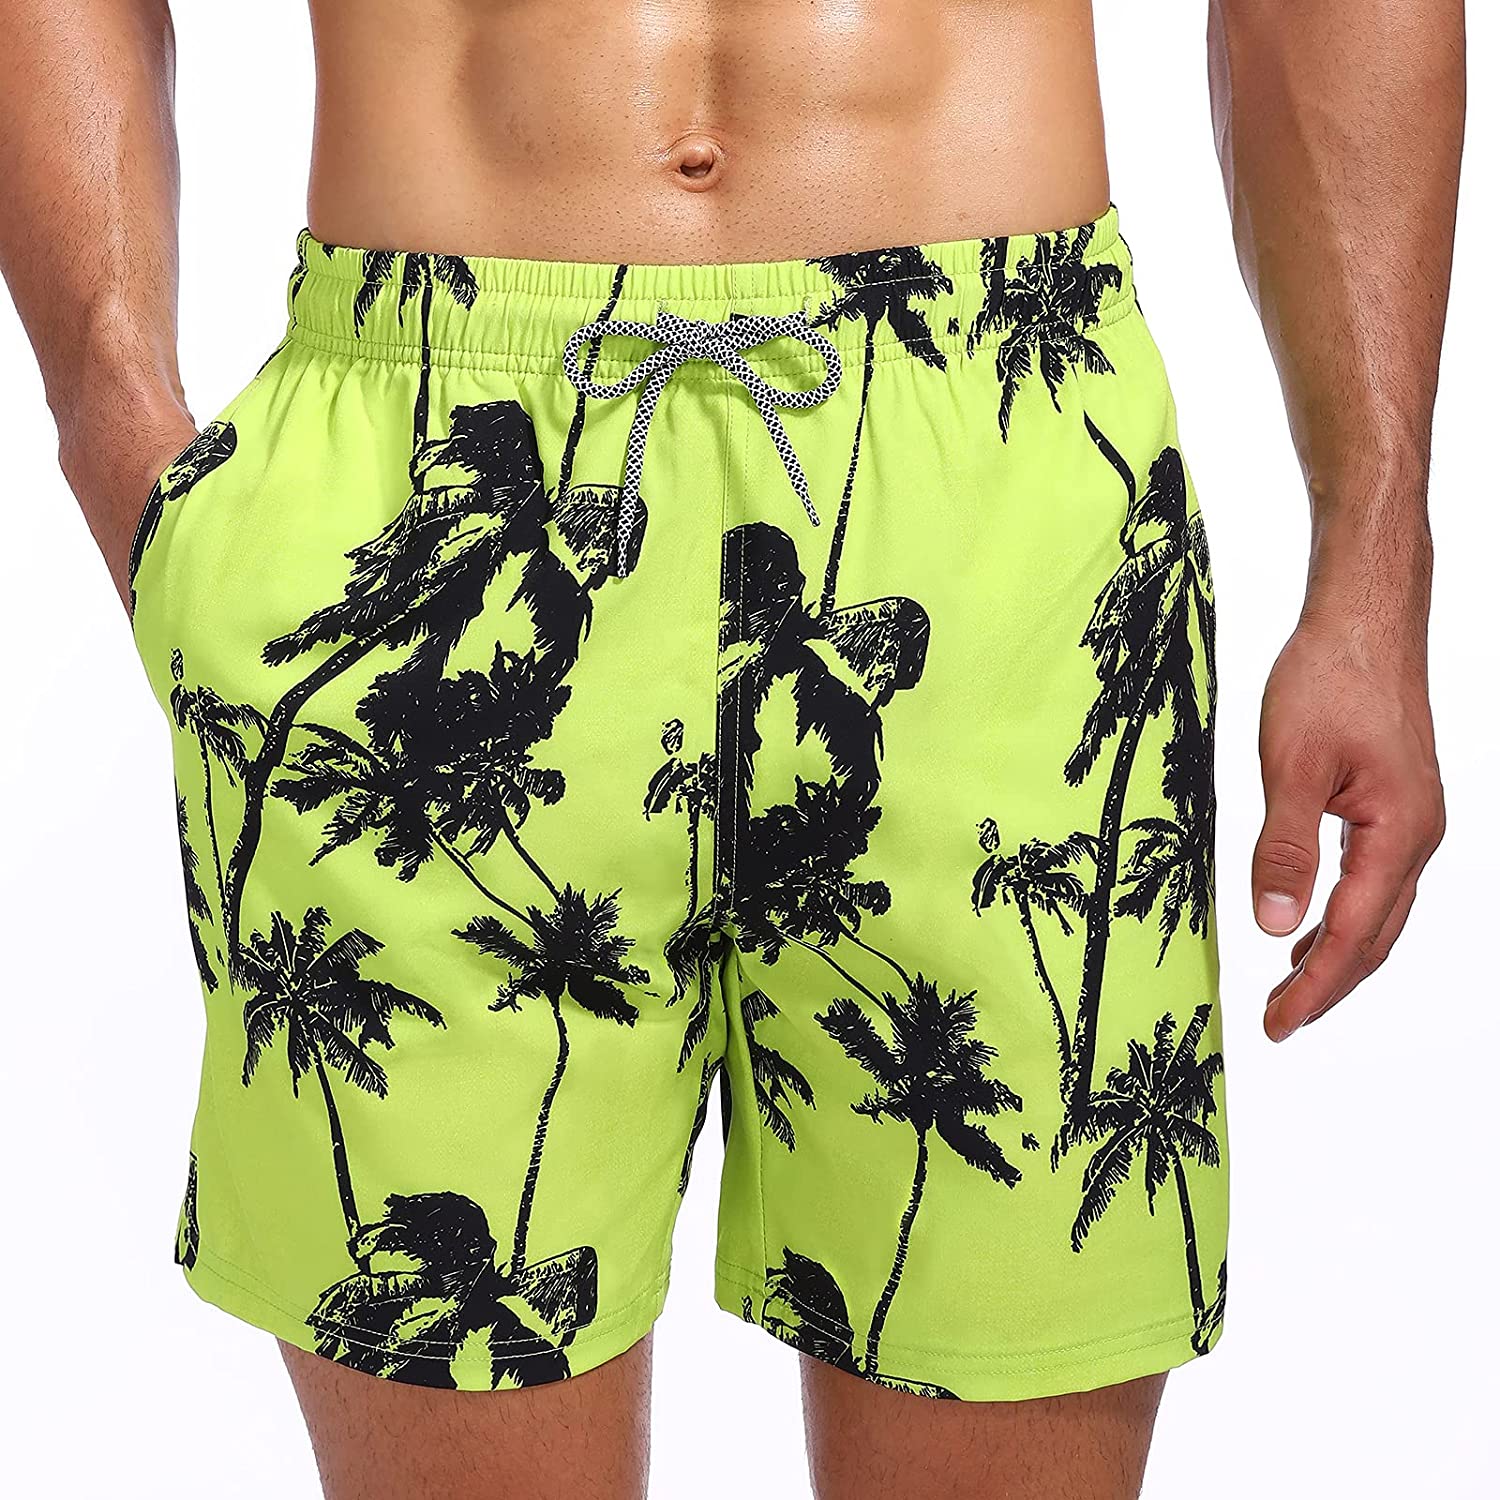 Kawell Mens Slim Fit Quick Dry Swim Shorts Swim Trunks Mens Bathing Suits with Mesh lining, Men's, Size: 3XL, Green